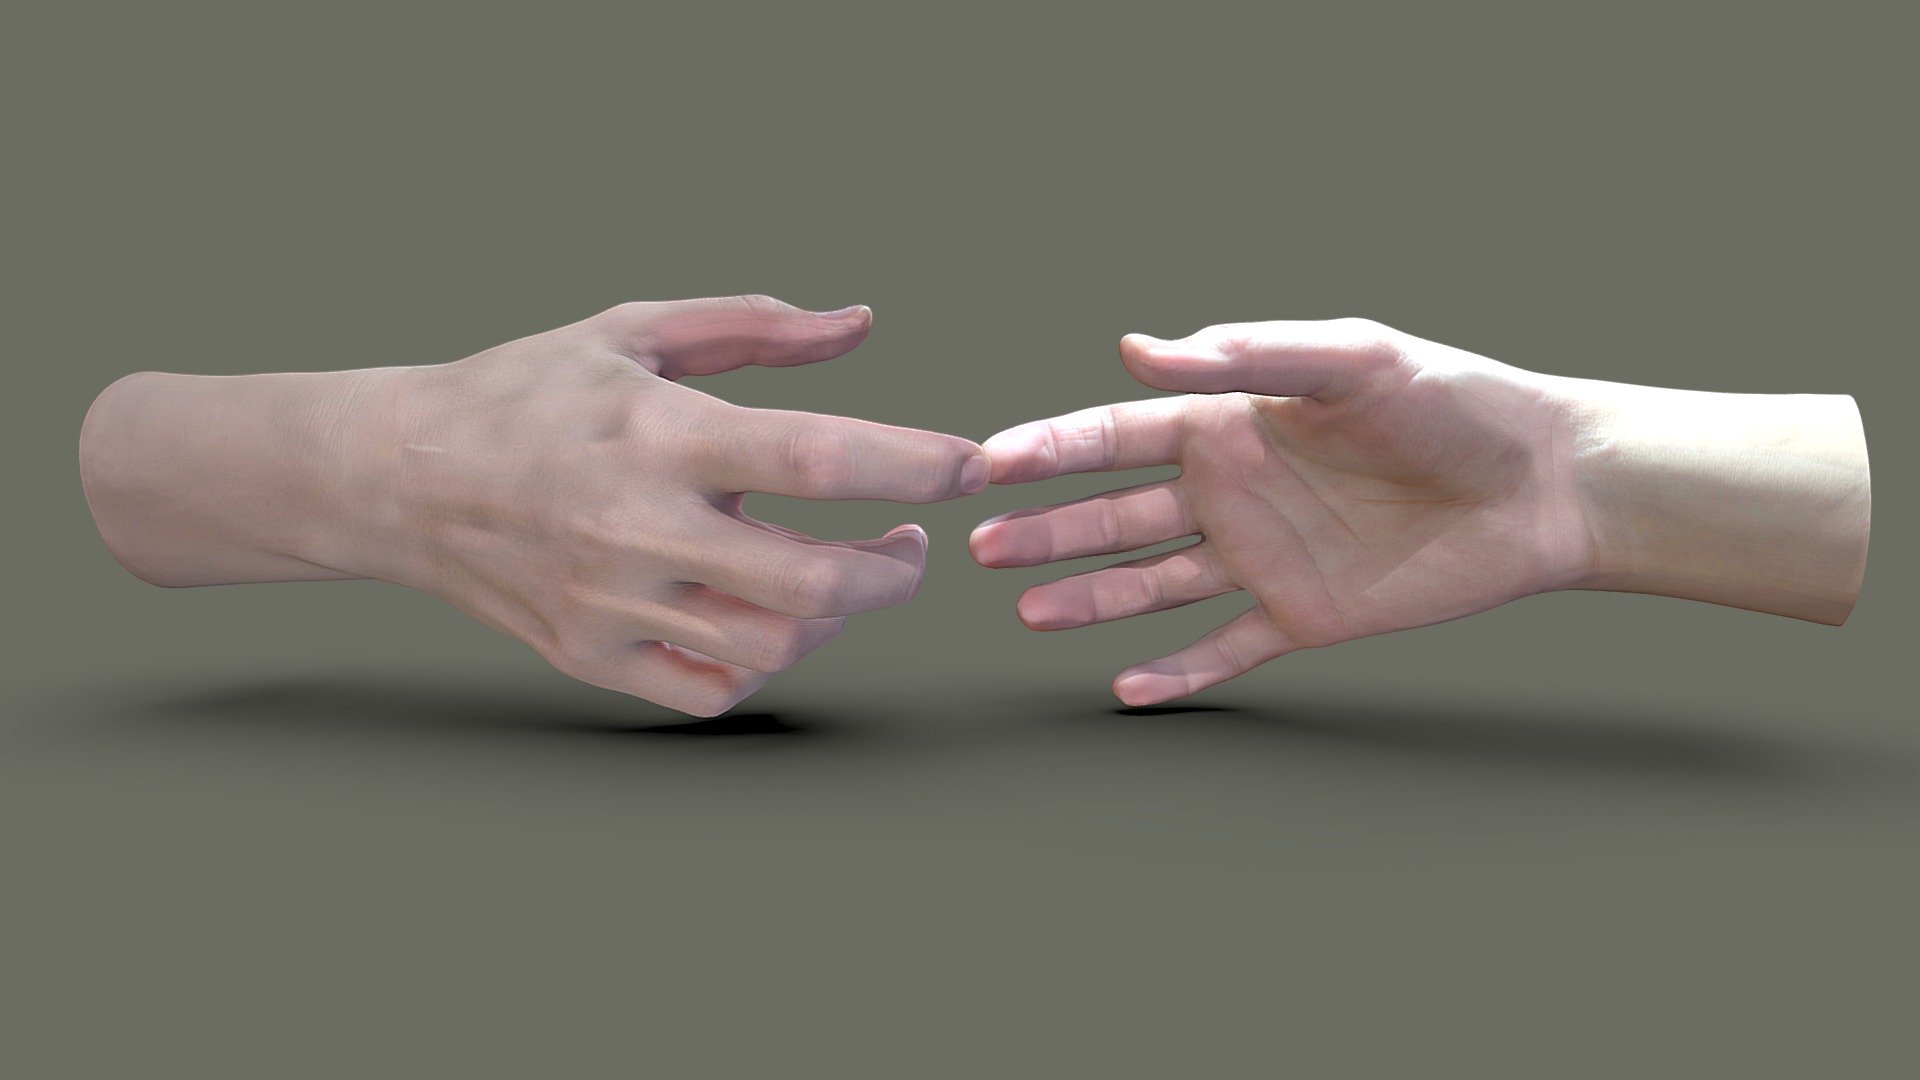 40 years old female hands reaching.

Photos taken with A7R IV and 20mm Sony FE

Processed with Metashape + Blender + Wrap3d - Female hands reaching - Buy Royalty Free 3D model by Lassi Kaukonen (@thesidekick) 3d model